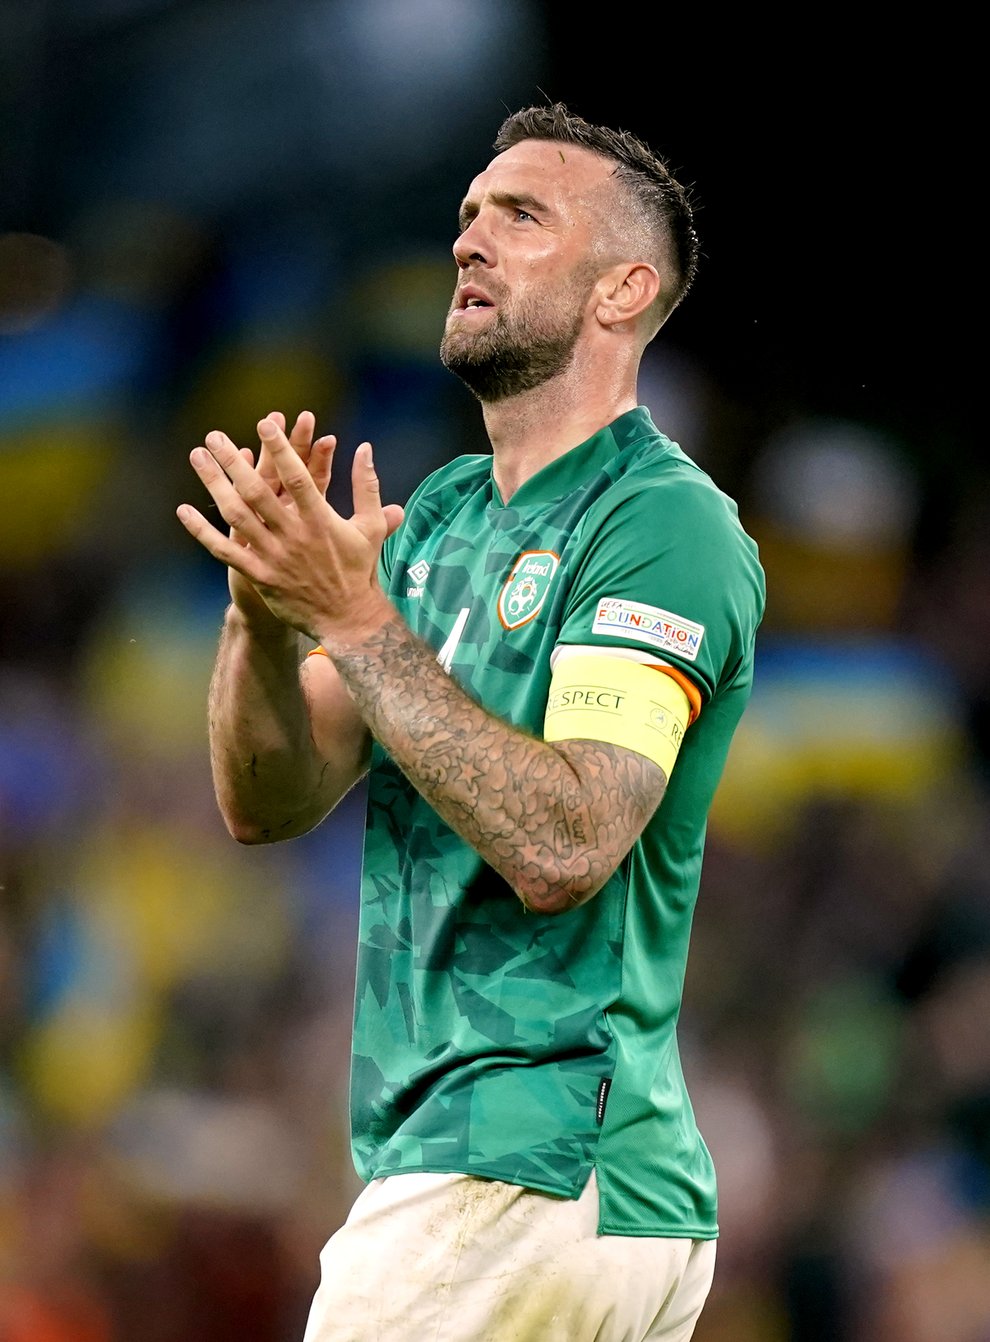 Republic of Ireland defender Shane Duffy was unlikely to get regular game-time at Brighton (Niall Carson/PA)